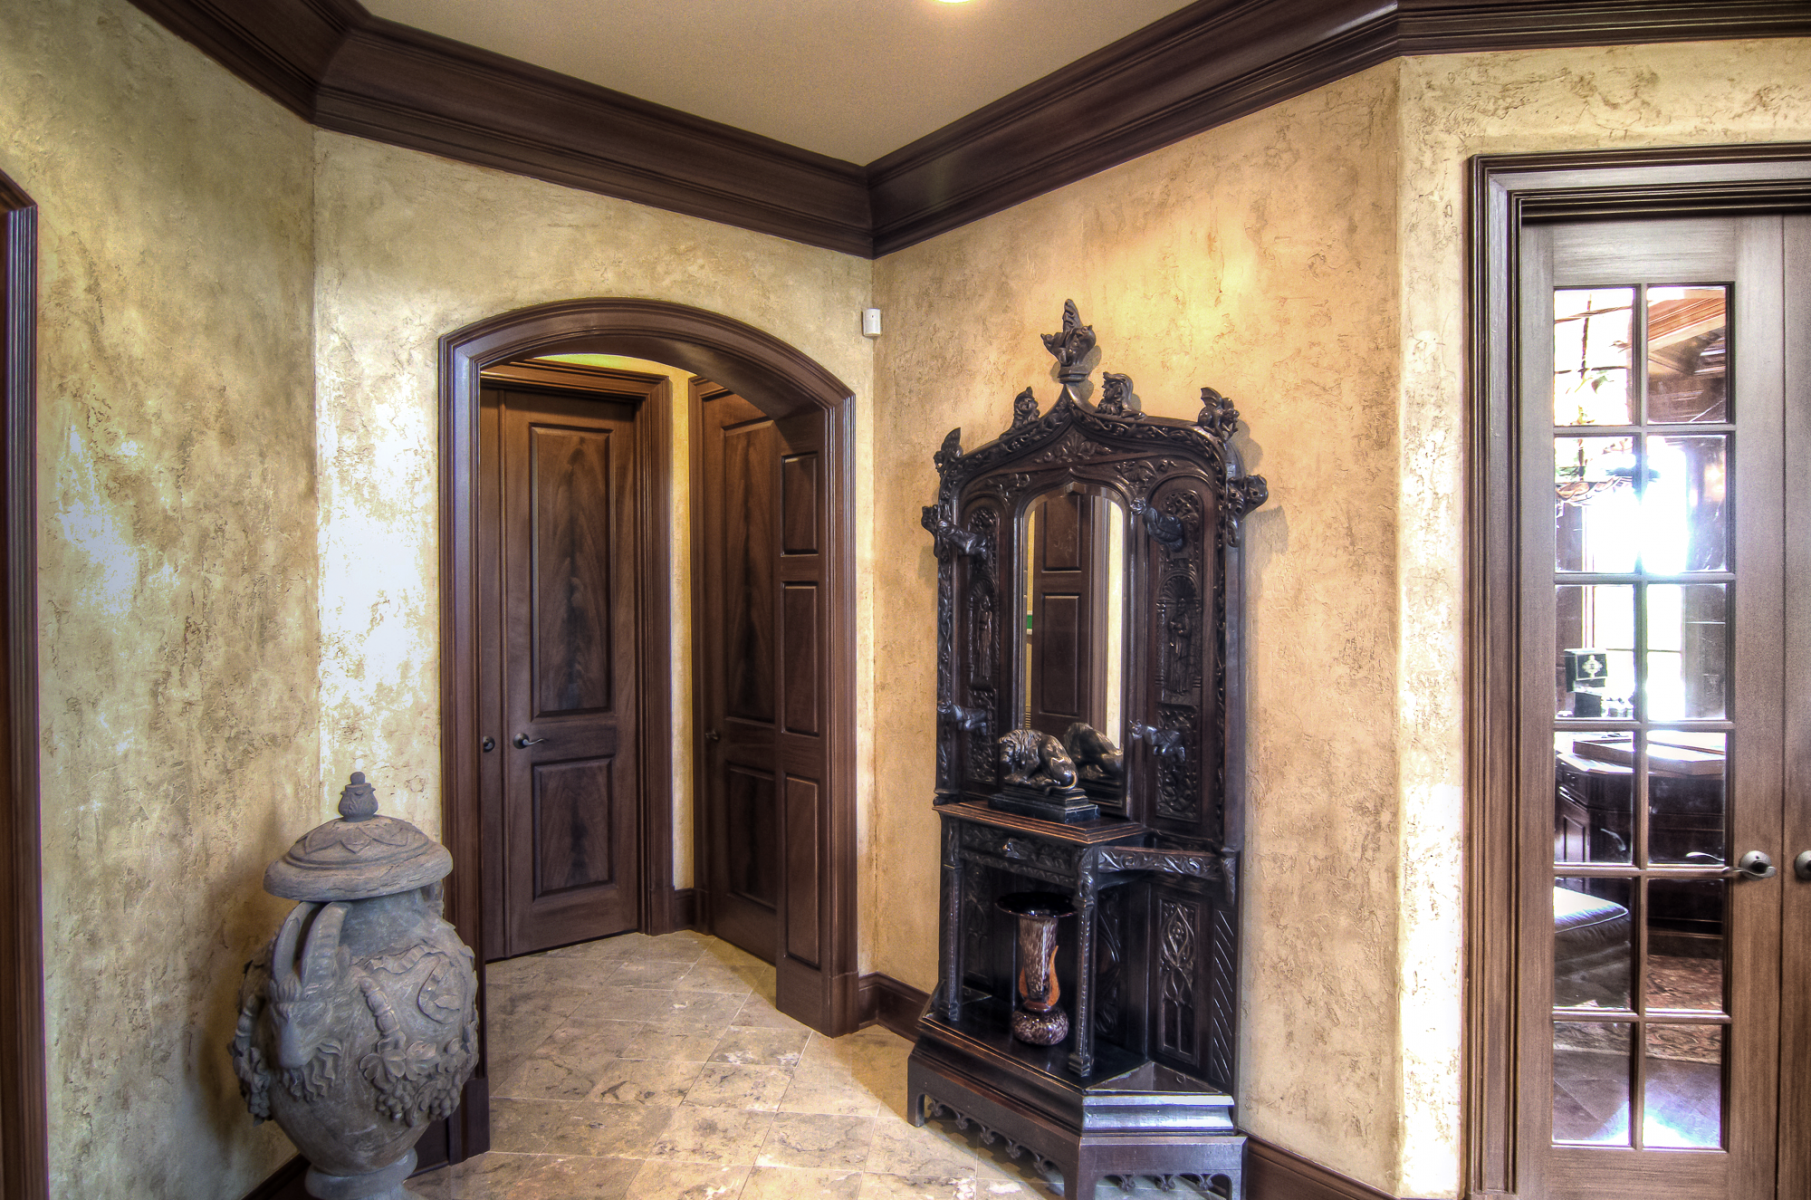 European plaster walls with wood glazed trim and faux mahogany master bedroom entrance doors.